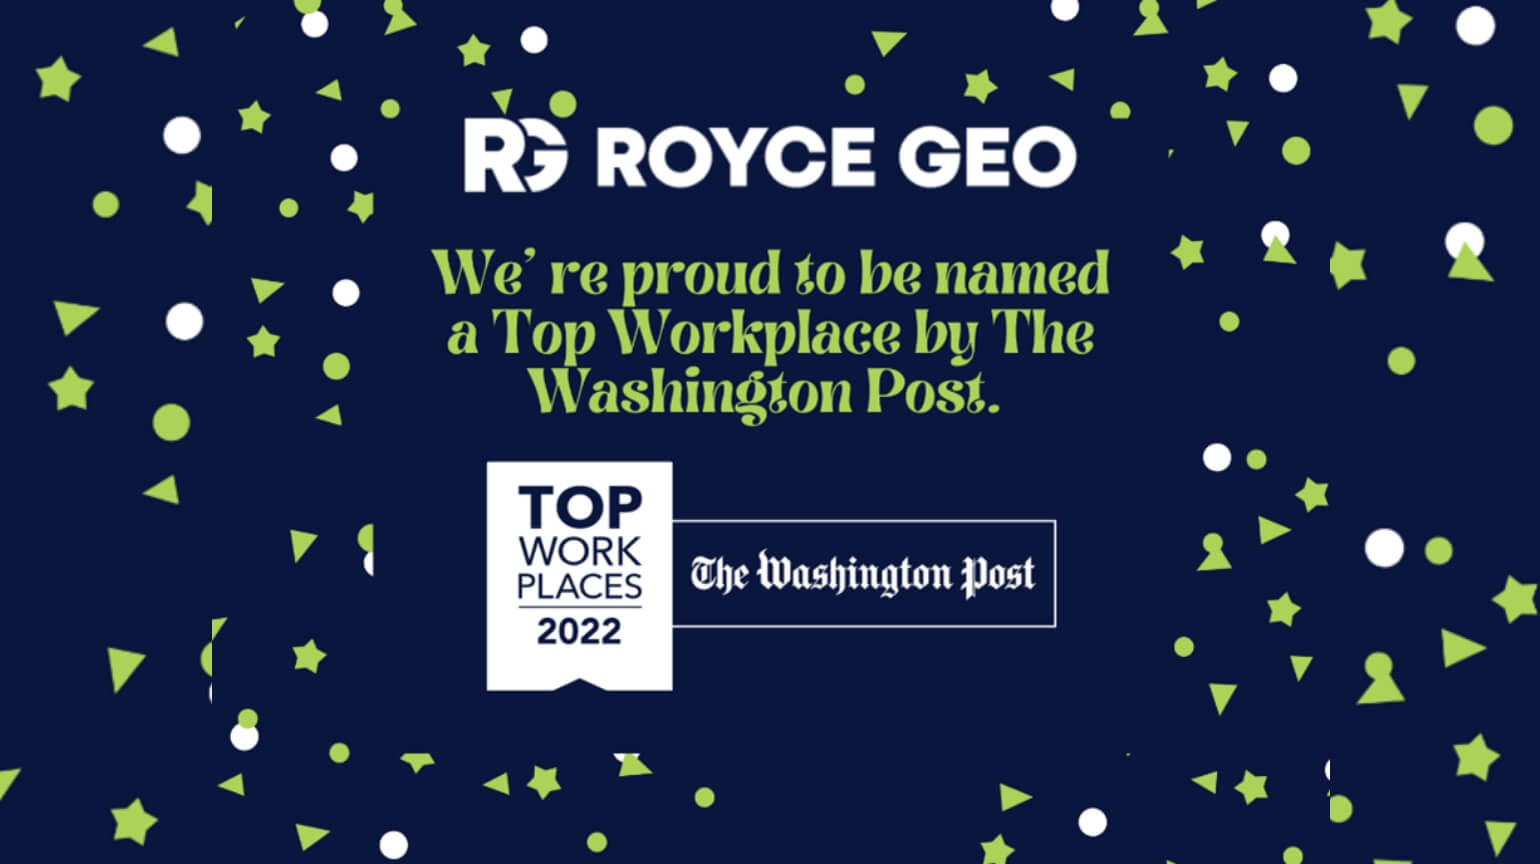 The Washington Post Top Work Places 2022